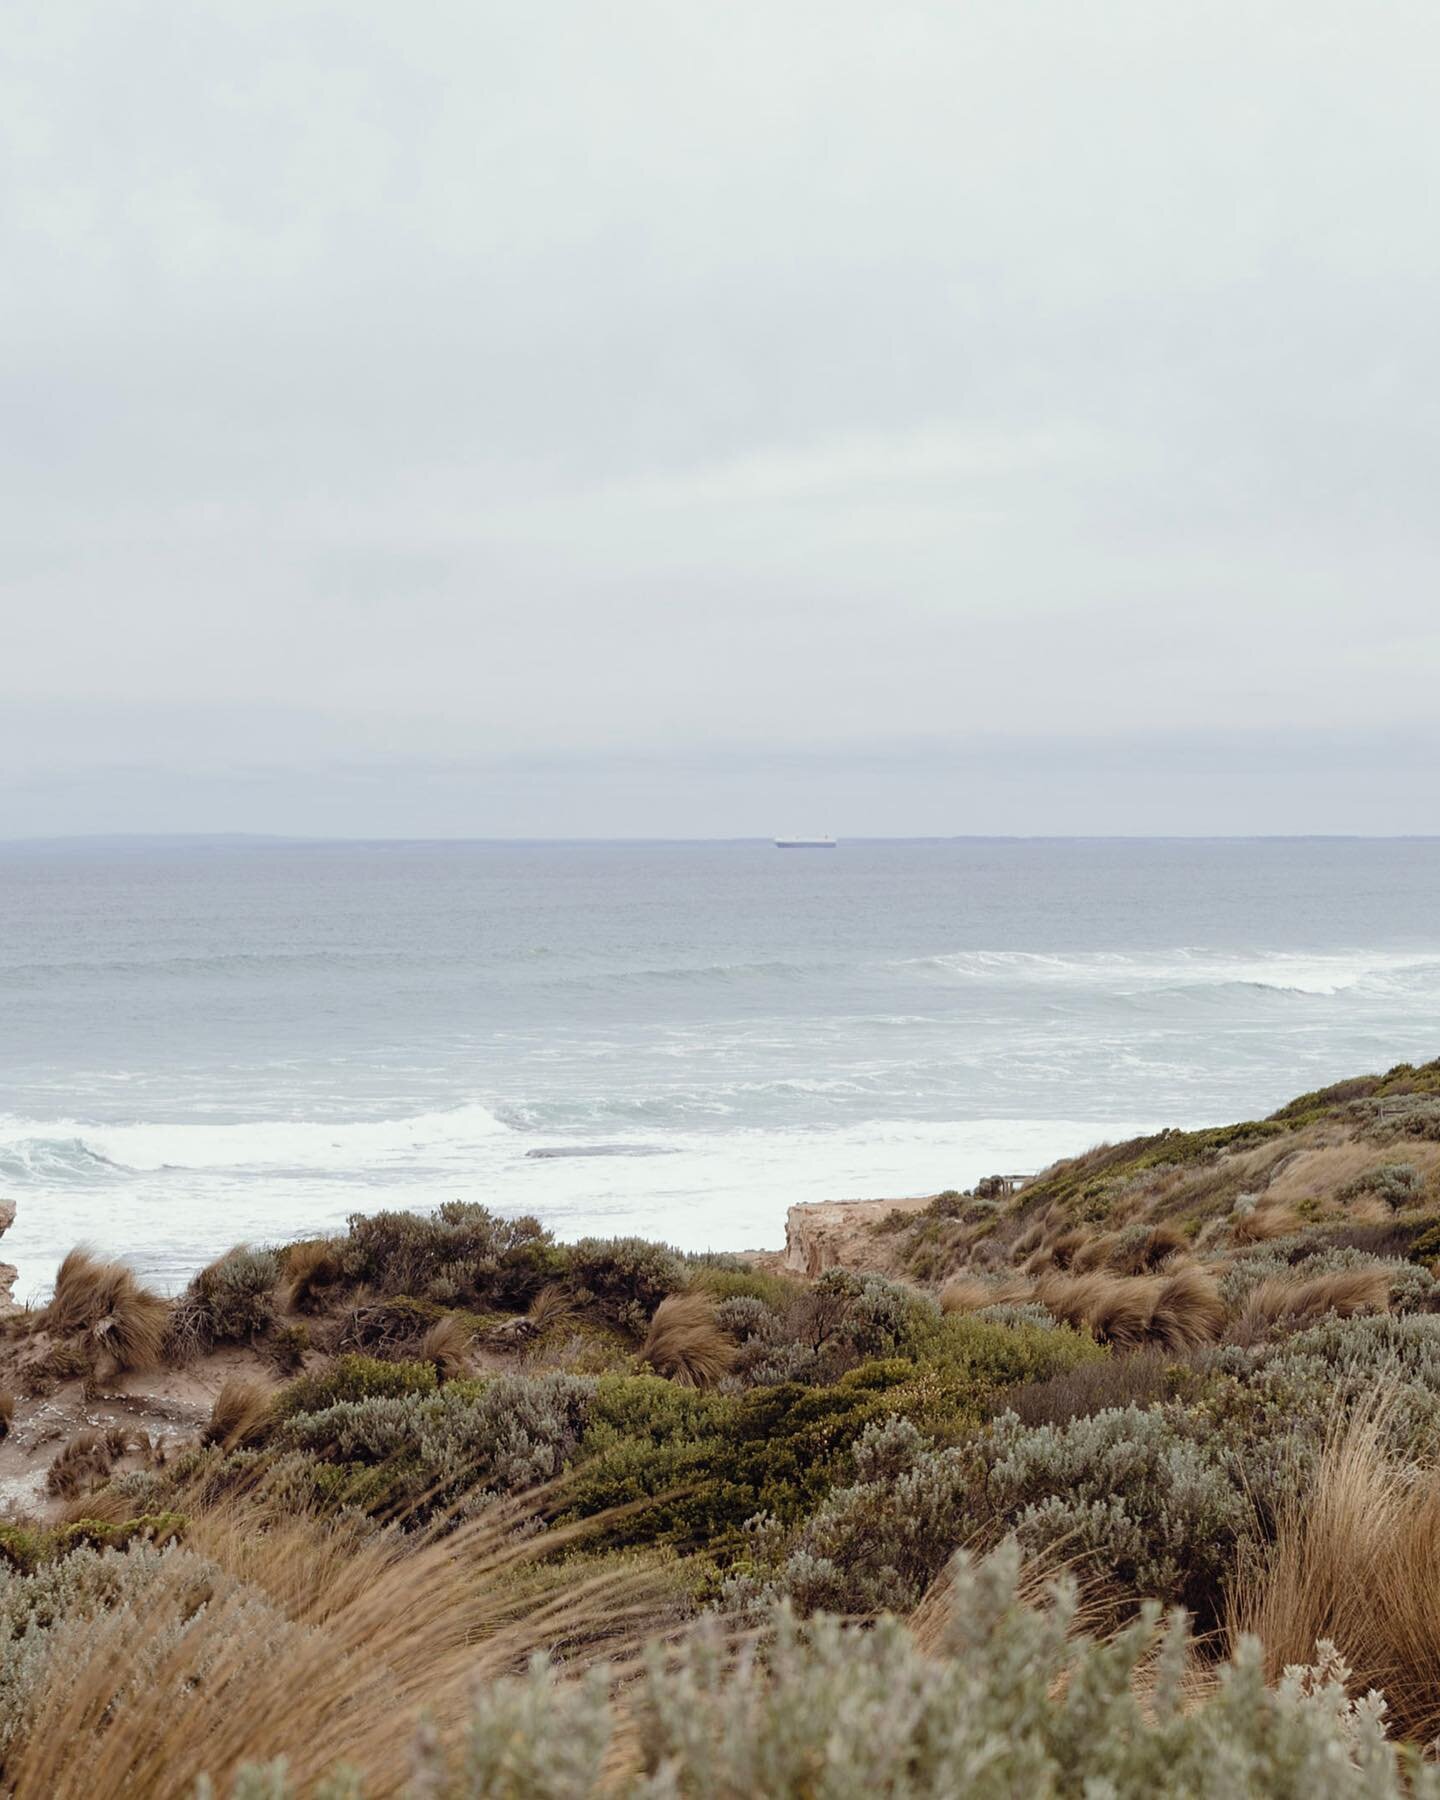 Mornington Peninsula&rsquo;s backyard is filled with endless beaches and coastal walks to explore.